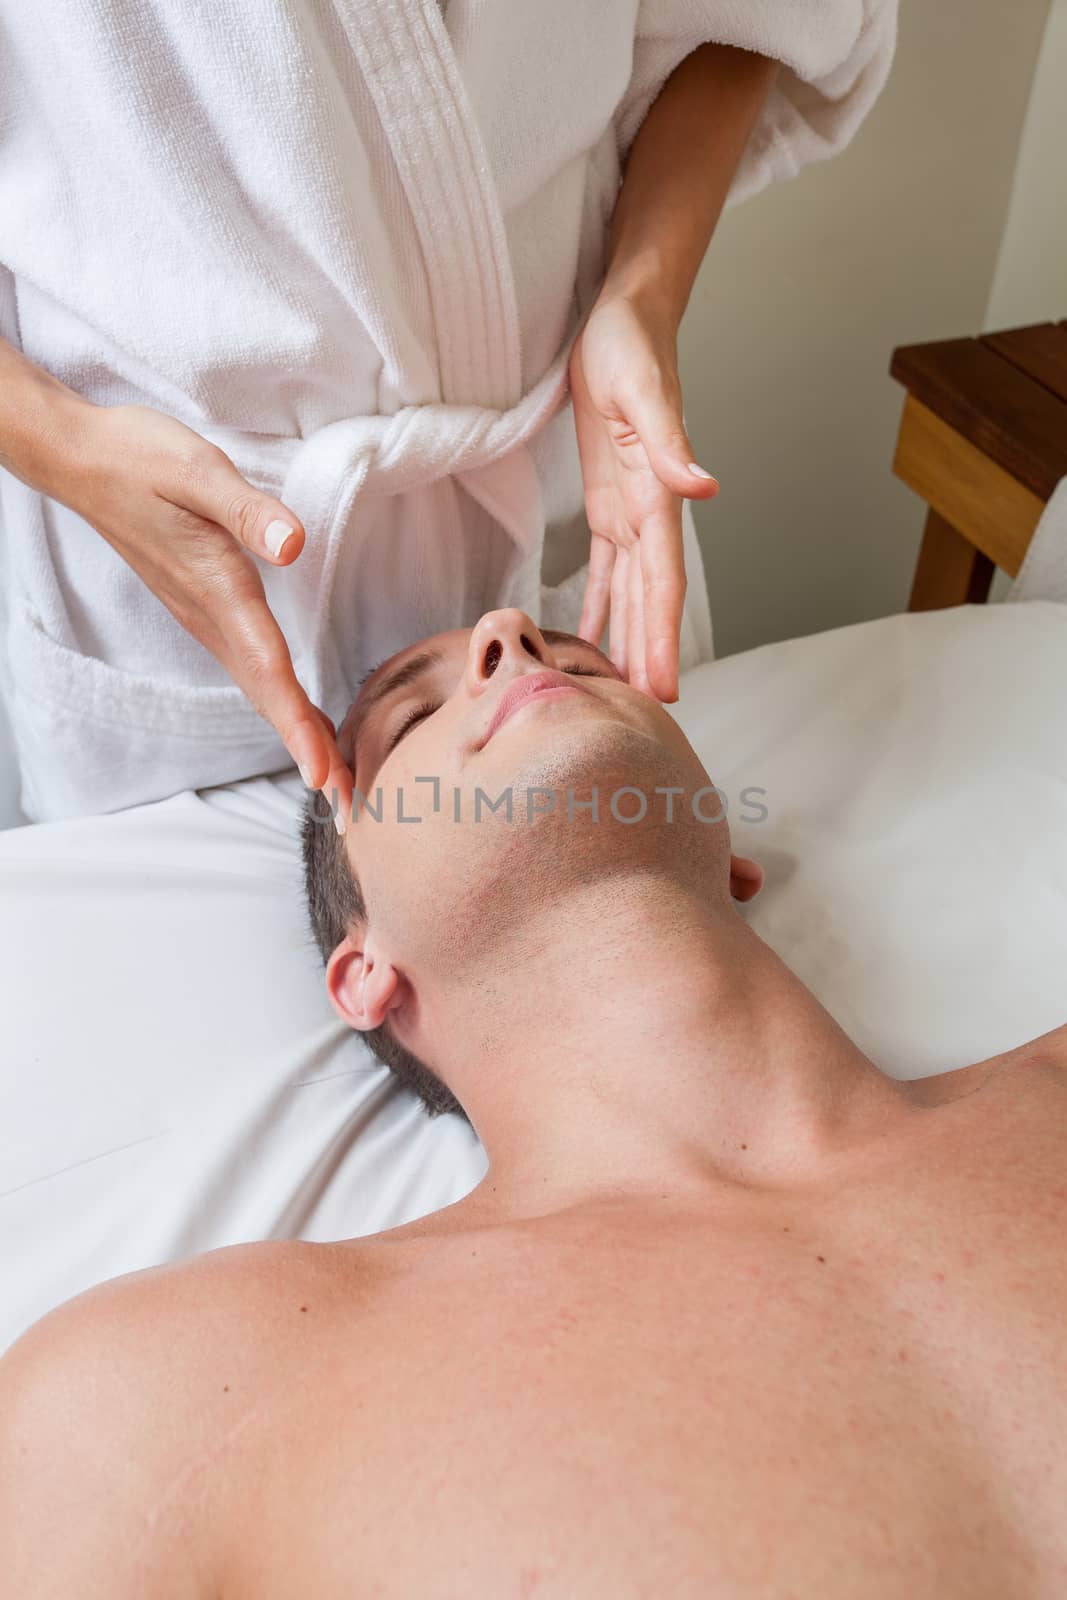 Guy receiving massage by ifilms